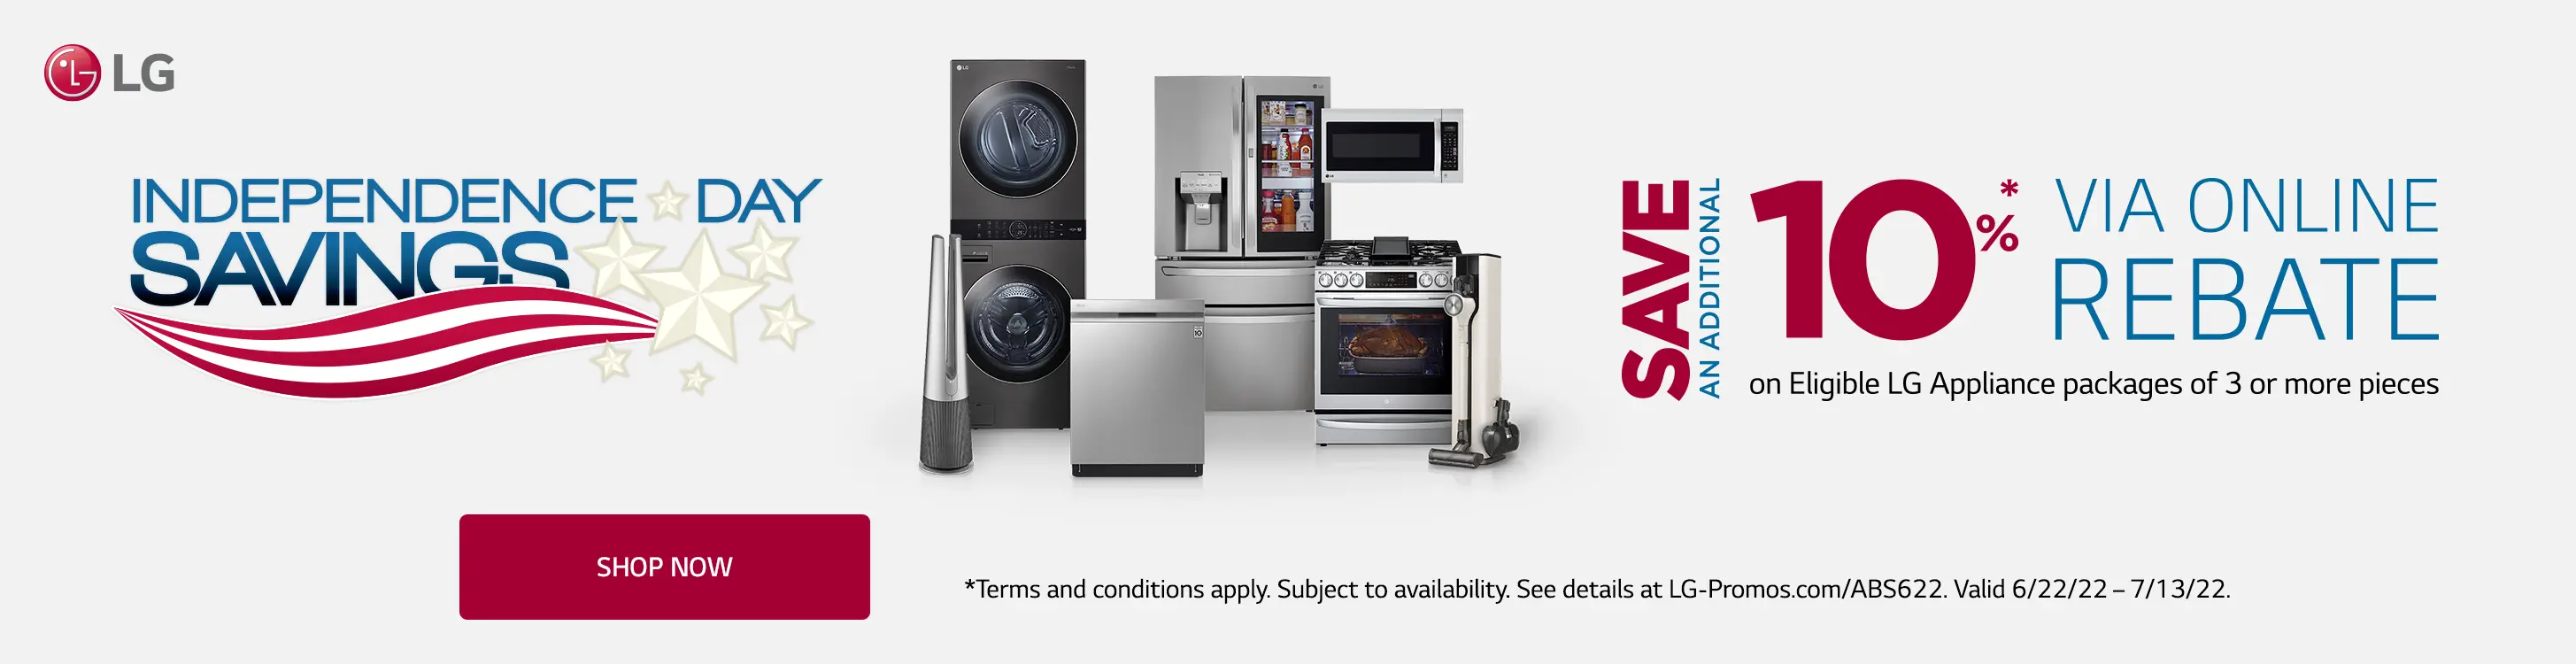 Save additional 10% via online rebate on eligible LG Appliance packages of 3 or more pieces